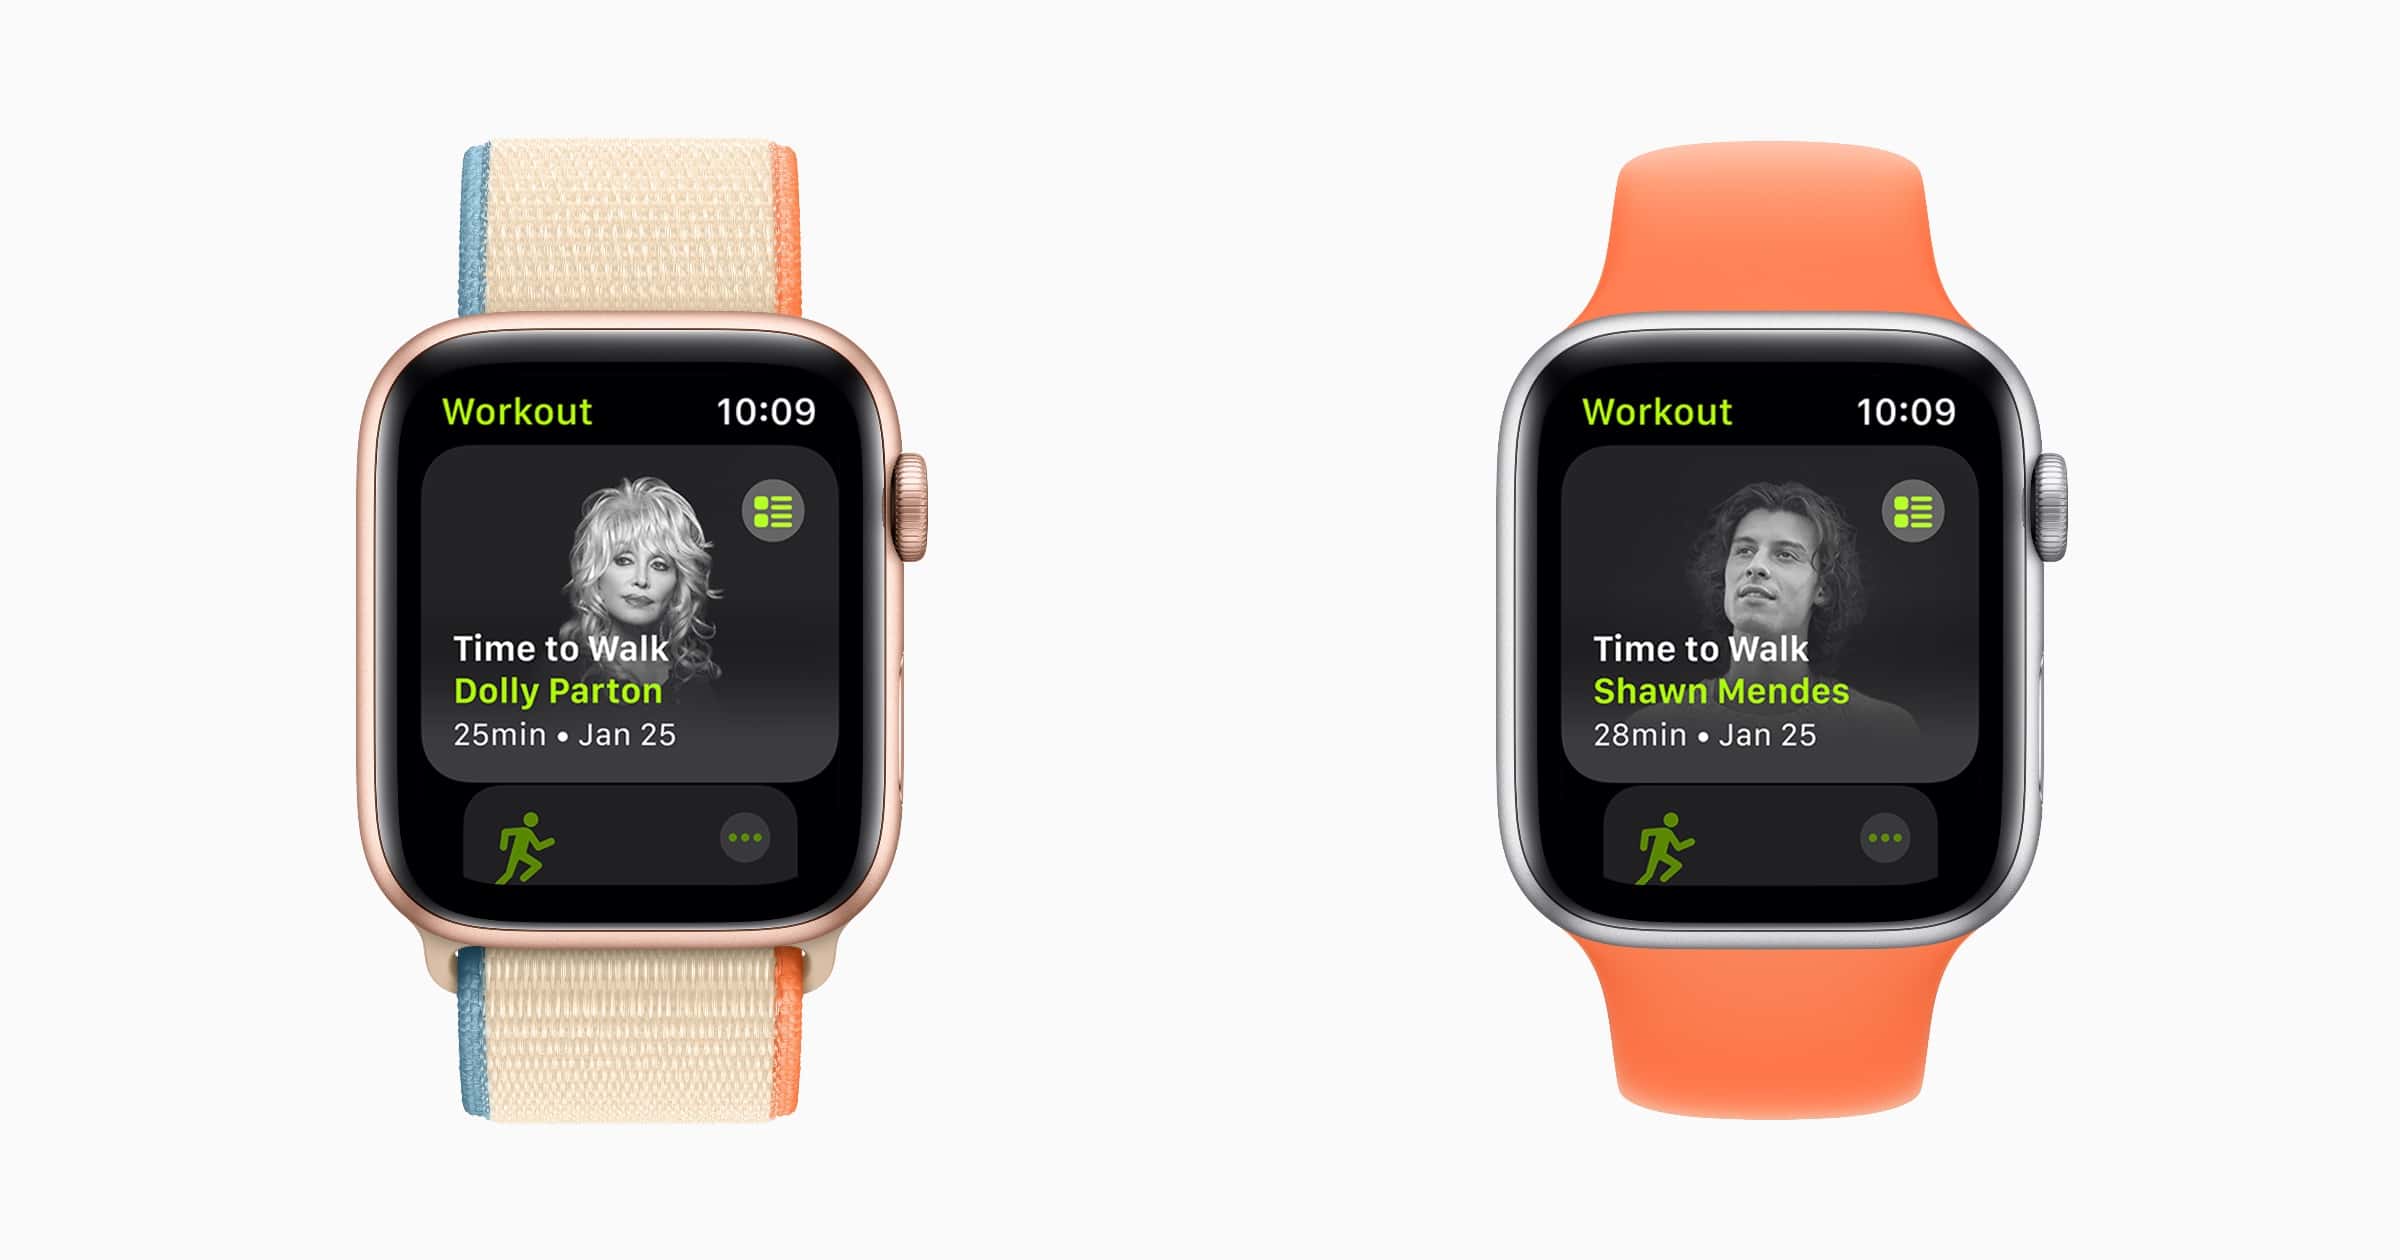 Time to walk on Apple Watch